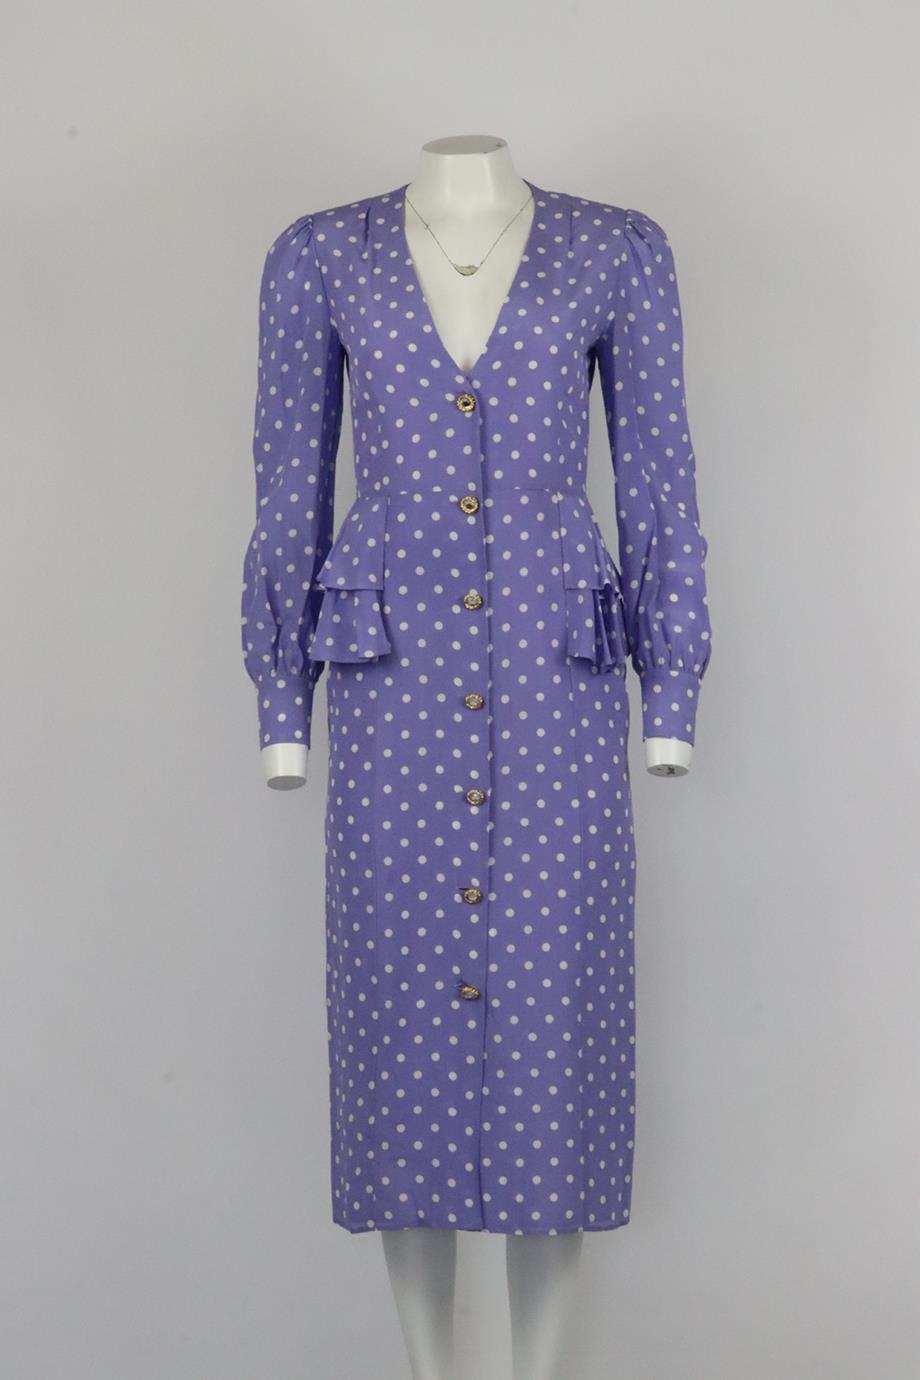 Alessandra Rich ruffled polka dot silk midi dress. Purple and white. Long sleeve, v-neck. Zip fastening at back. 100% Silk; lining: 100% polyamide. Size: IT 40 (UK 8, US 4, FR 36). Bust: 33.7 in. Waist: 26.6 in. Hips: 33.5 in. Length: 47 in. Very